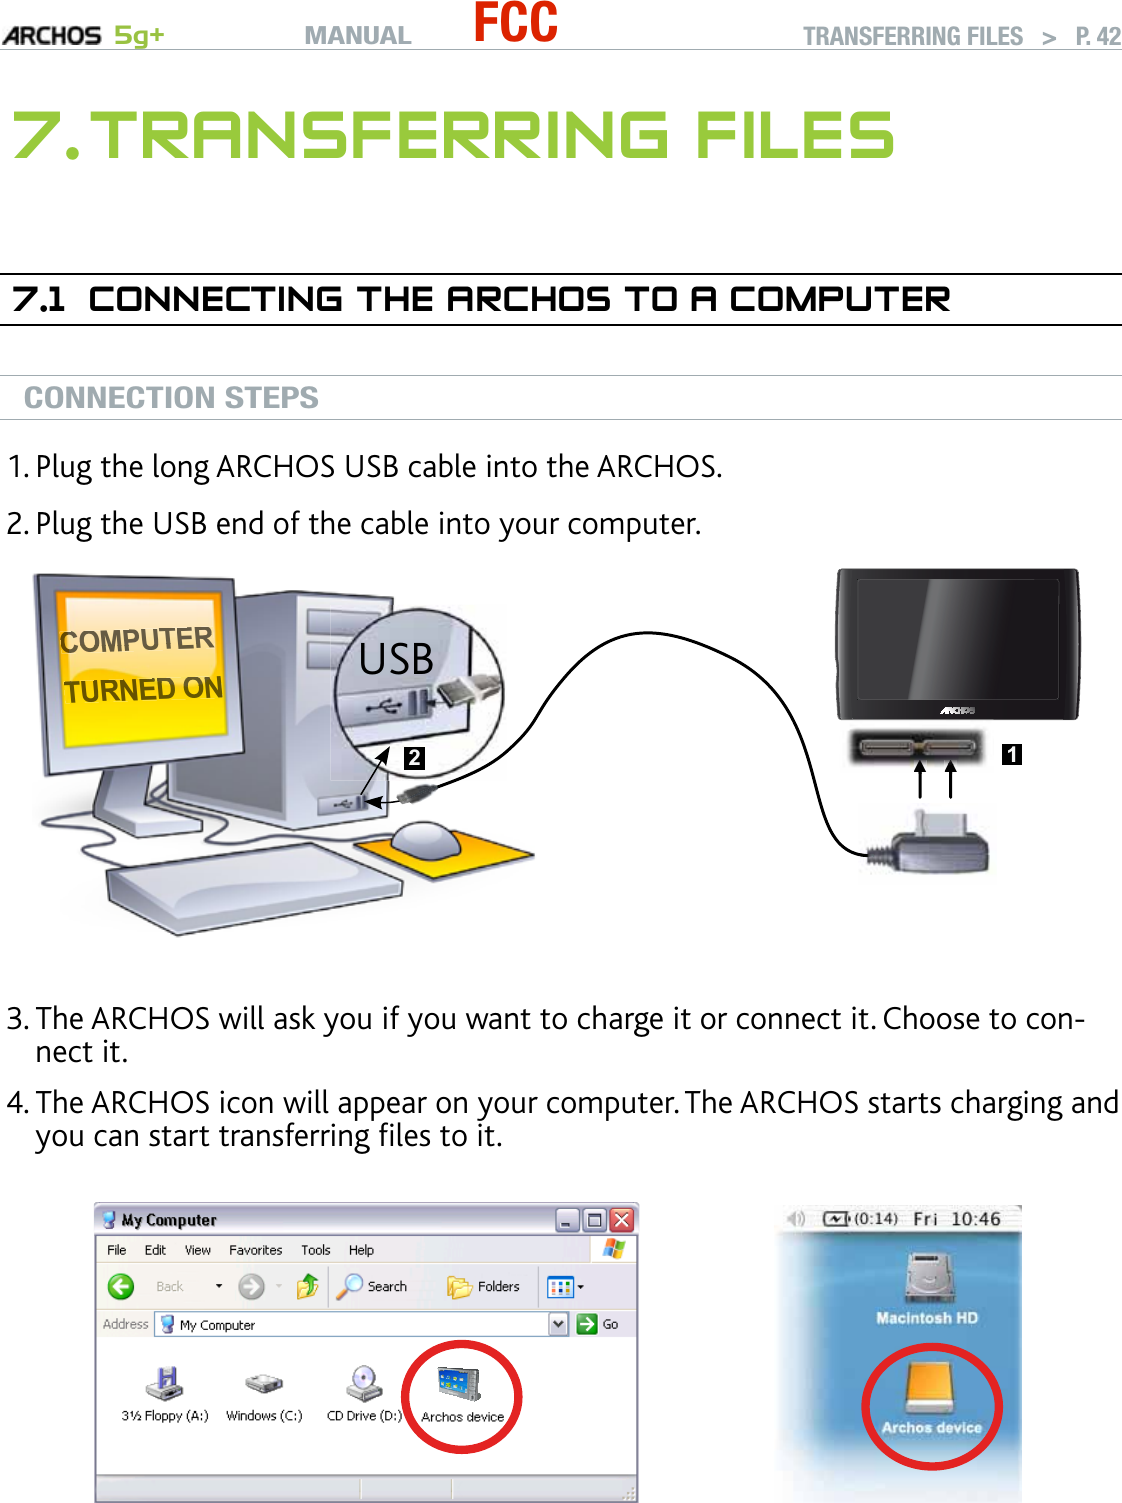 MANUAL 5g+ FCC TRANSFERRING FILES   &gt;   P. 427. TRANSFERRING FILES7.1  CONNECTING THE ARCHOS TO A COMPUTERCONNECTION STEPSPlug the long ARCHOS USB cable into the ARCHOS.Plug the USB end of the cable into your computer.CCCCCCCCCCCCCOOOMMPPUUTTEERRRRTTTURNEEEEEEEDDDDDDD OOOOOOONNNNNNNUSB 21▲ ▲▲▲▲▲▲▲▲▲▲▲▲▲▲▲▲The ARCHOS will ask you if you want to charge it or connect it. Choose to con-nect it. The ARCHOS icon will appear on your computer. The ARCHOS starts charging and you can start transferring ﬁles to it.If you do not have Windows Media® Player 10 or higher installed on your com-puter, the ARCHOS will ask you if you want to charge its battery or connect it as a mass storage device (Hard Drive). Choose to connect it. 1.2.3.4.